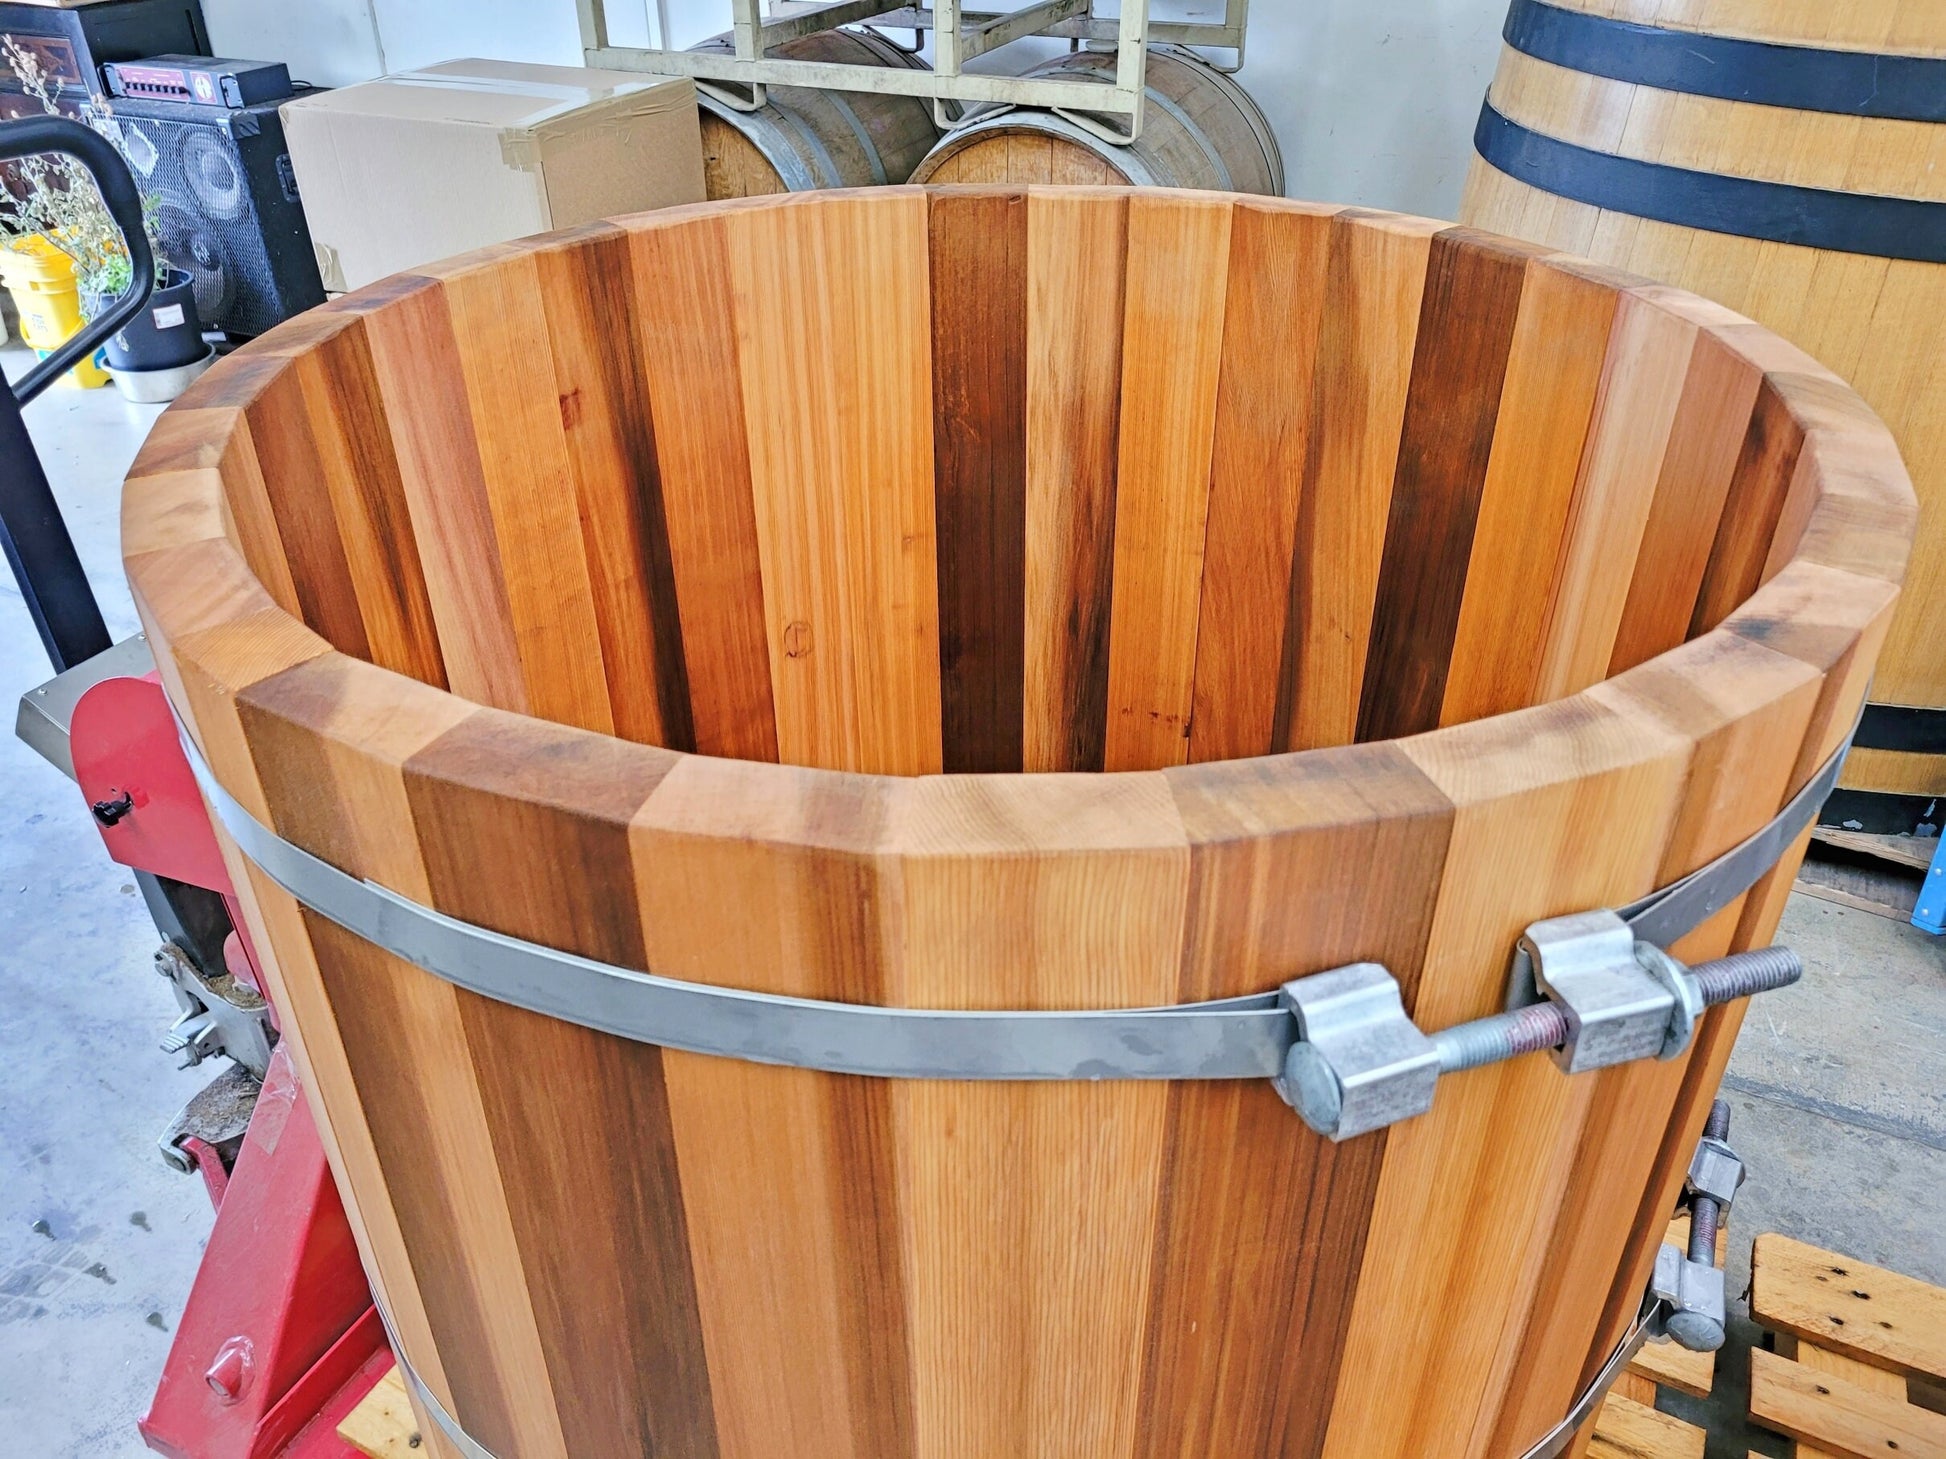 Miso Barrel for making miso soup made from kiln dried cedar - Traditional Japanese Method Construction - 100% Organic